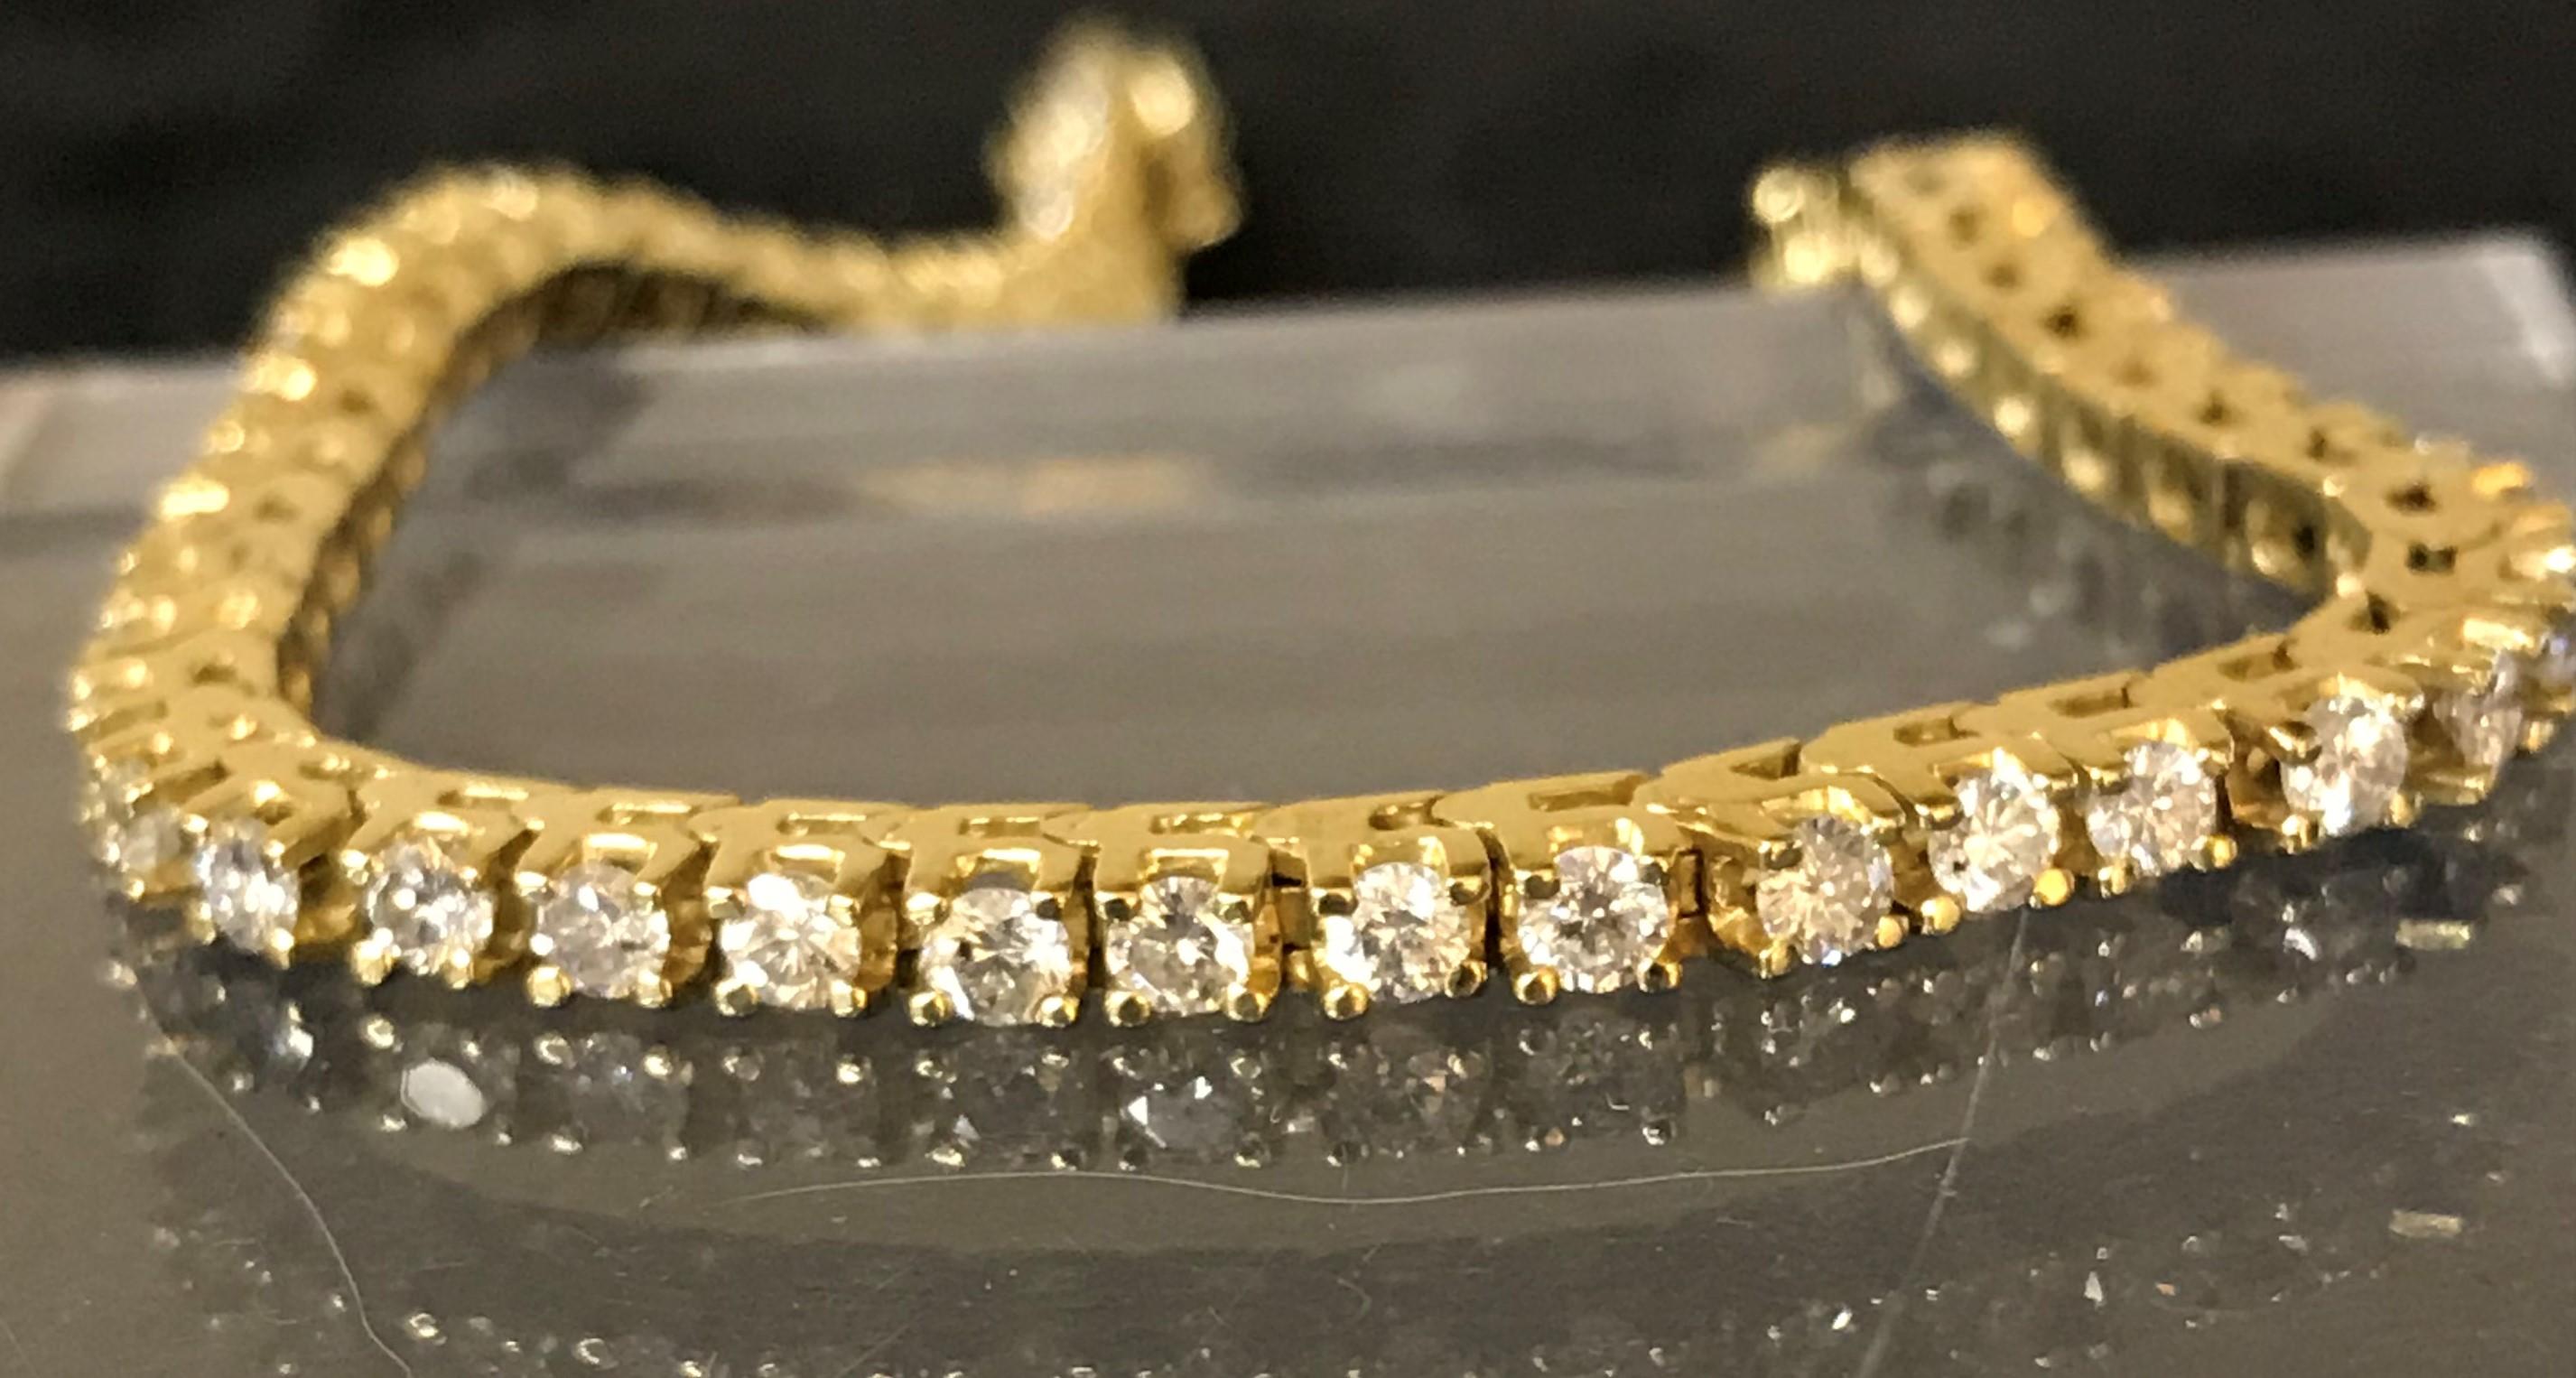 This beautiful, sparkly bracelet goes with any outfit! A perfect gift!!
It can be worn alone and stacked with other bracelets.
14 karat yellow gold
51 total round diamonds, each set in a 4 prong mounting
Approximately 2.0 total diamond weight
Easy